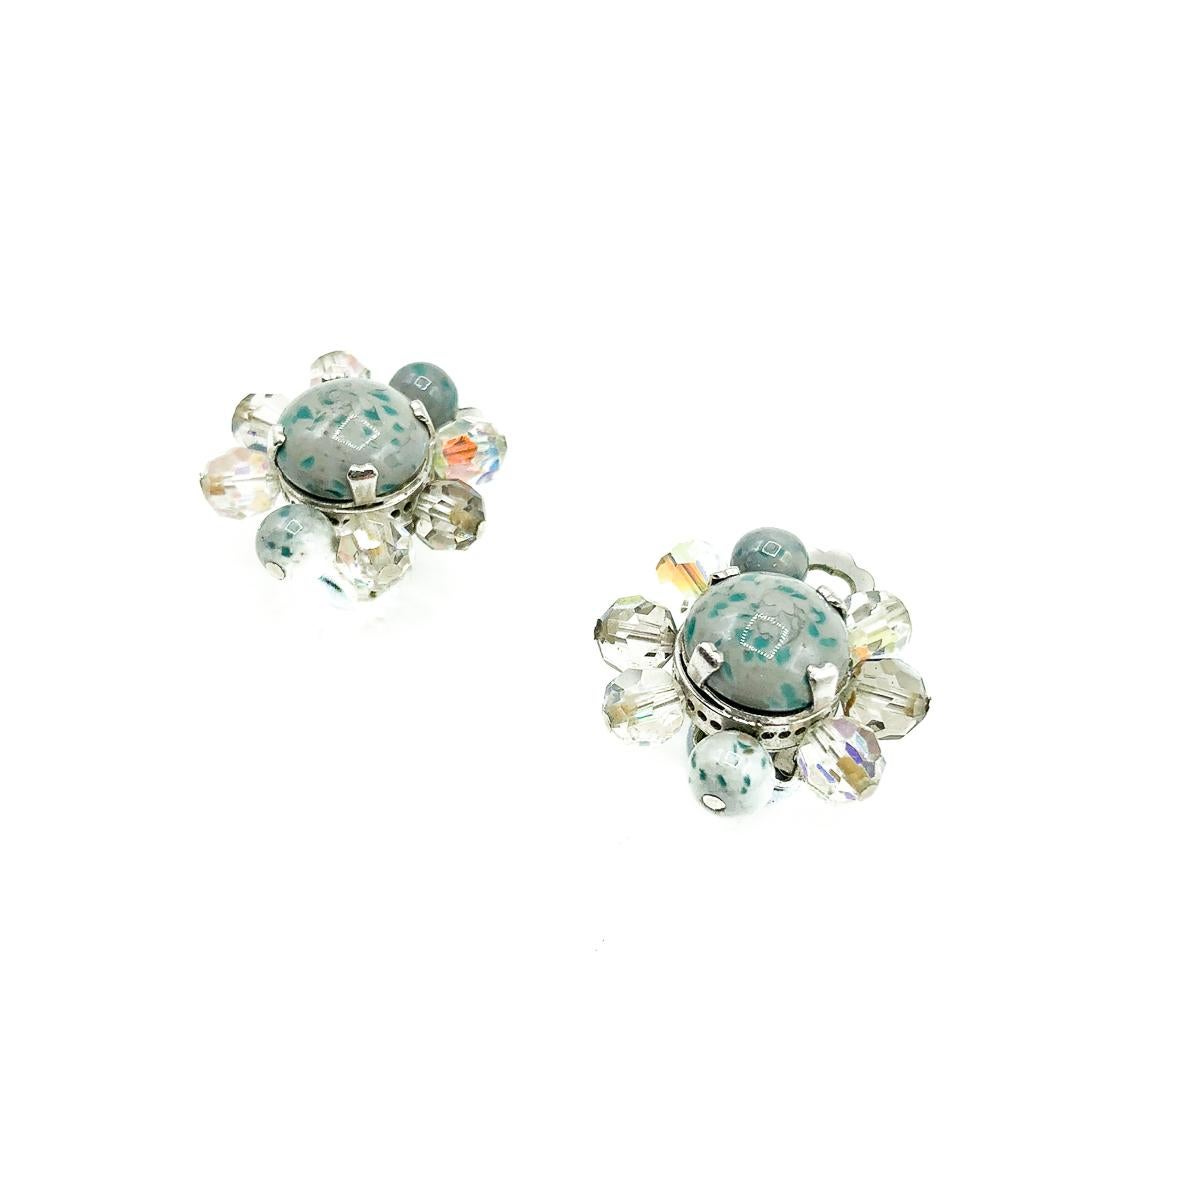 A beautiful and very feminine pair of Vintage Dior Ice Blue Clips from 1958. Crafted with speckled glass cabochon stones in a most fabulous blue grey tone, with aurora borealis crystals set individually with claws and pins. In silver tone metal. In